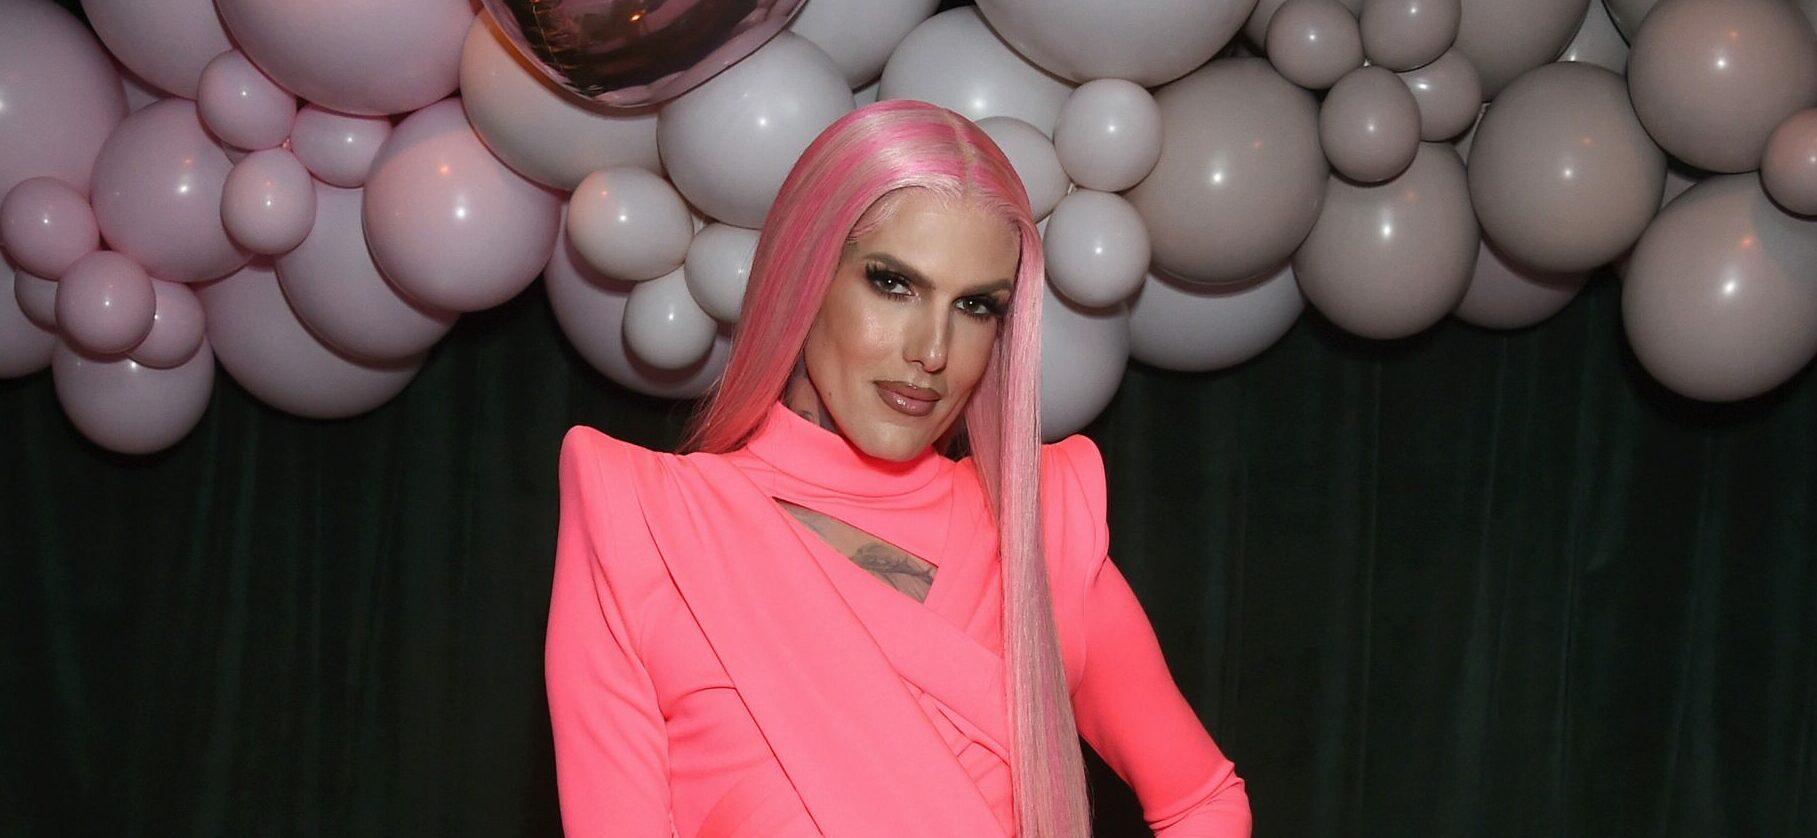 Jeffree Star Picks A Side In The Hailey Bieber-Selena Gomez Feud: ‘Team Not Bullying Anyone’